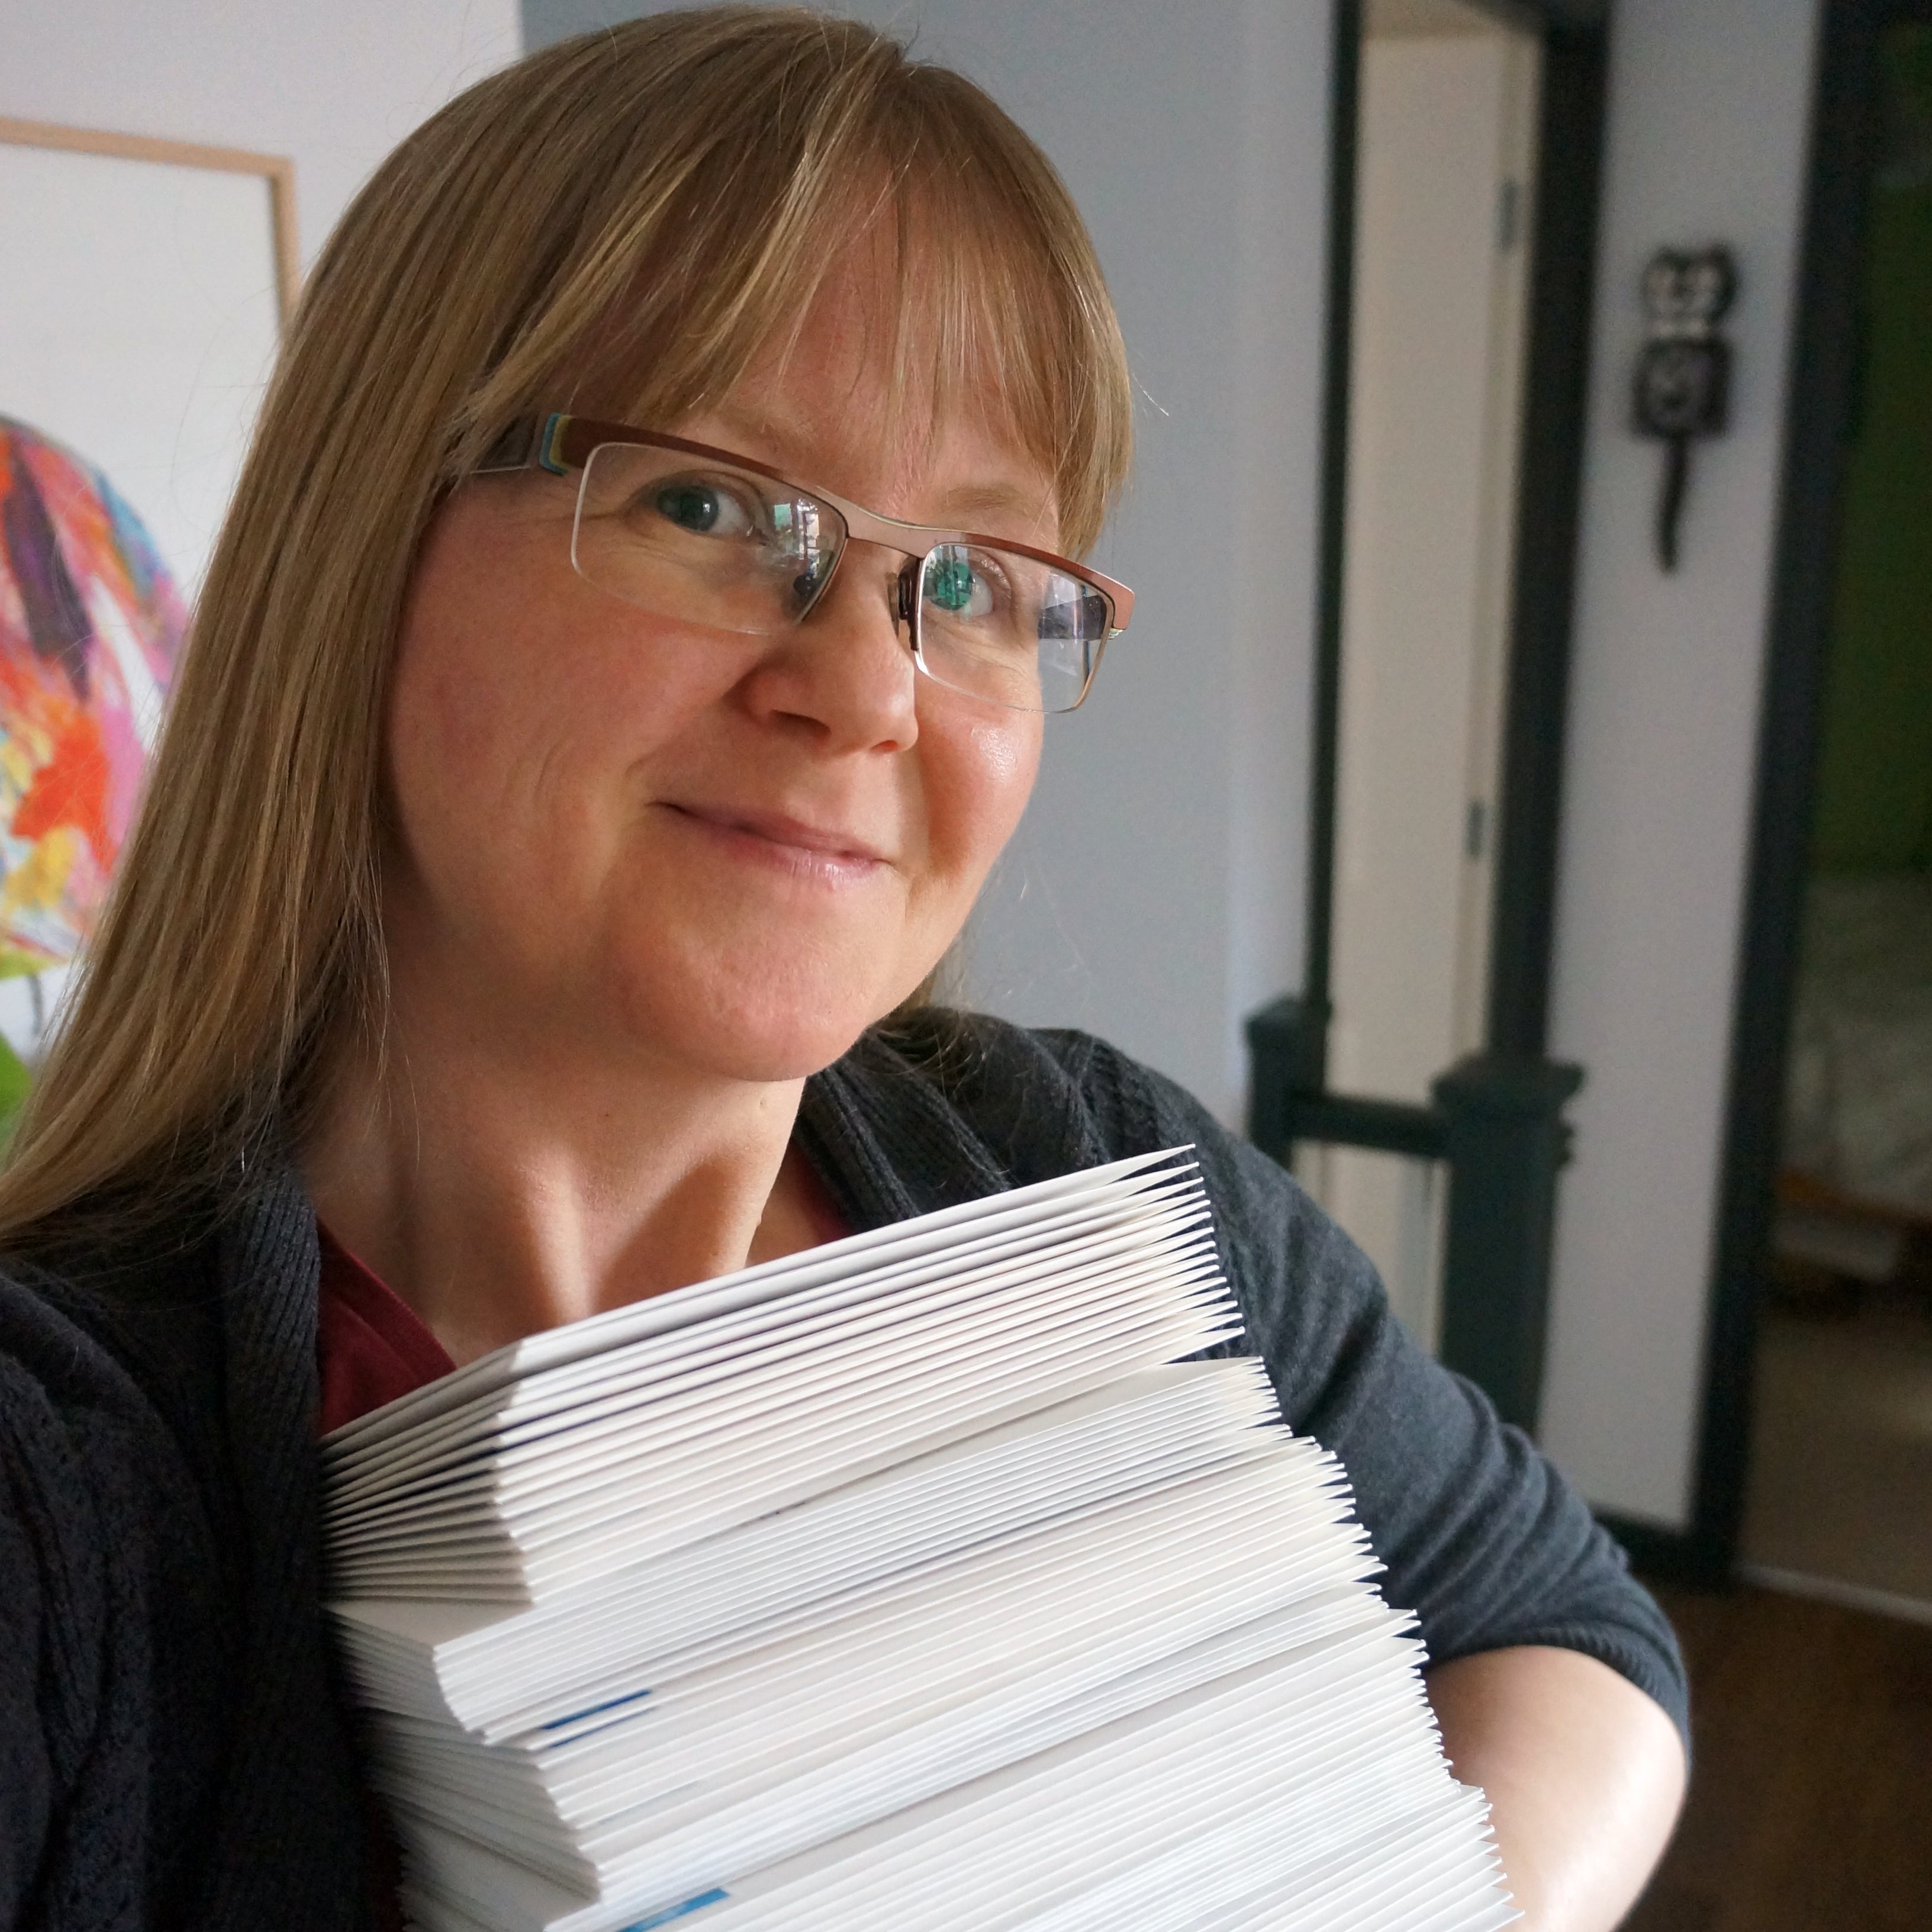 Claire, founder of The Curious Pancake, with a healthy stack of handwritten cards ready to be posted!